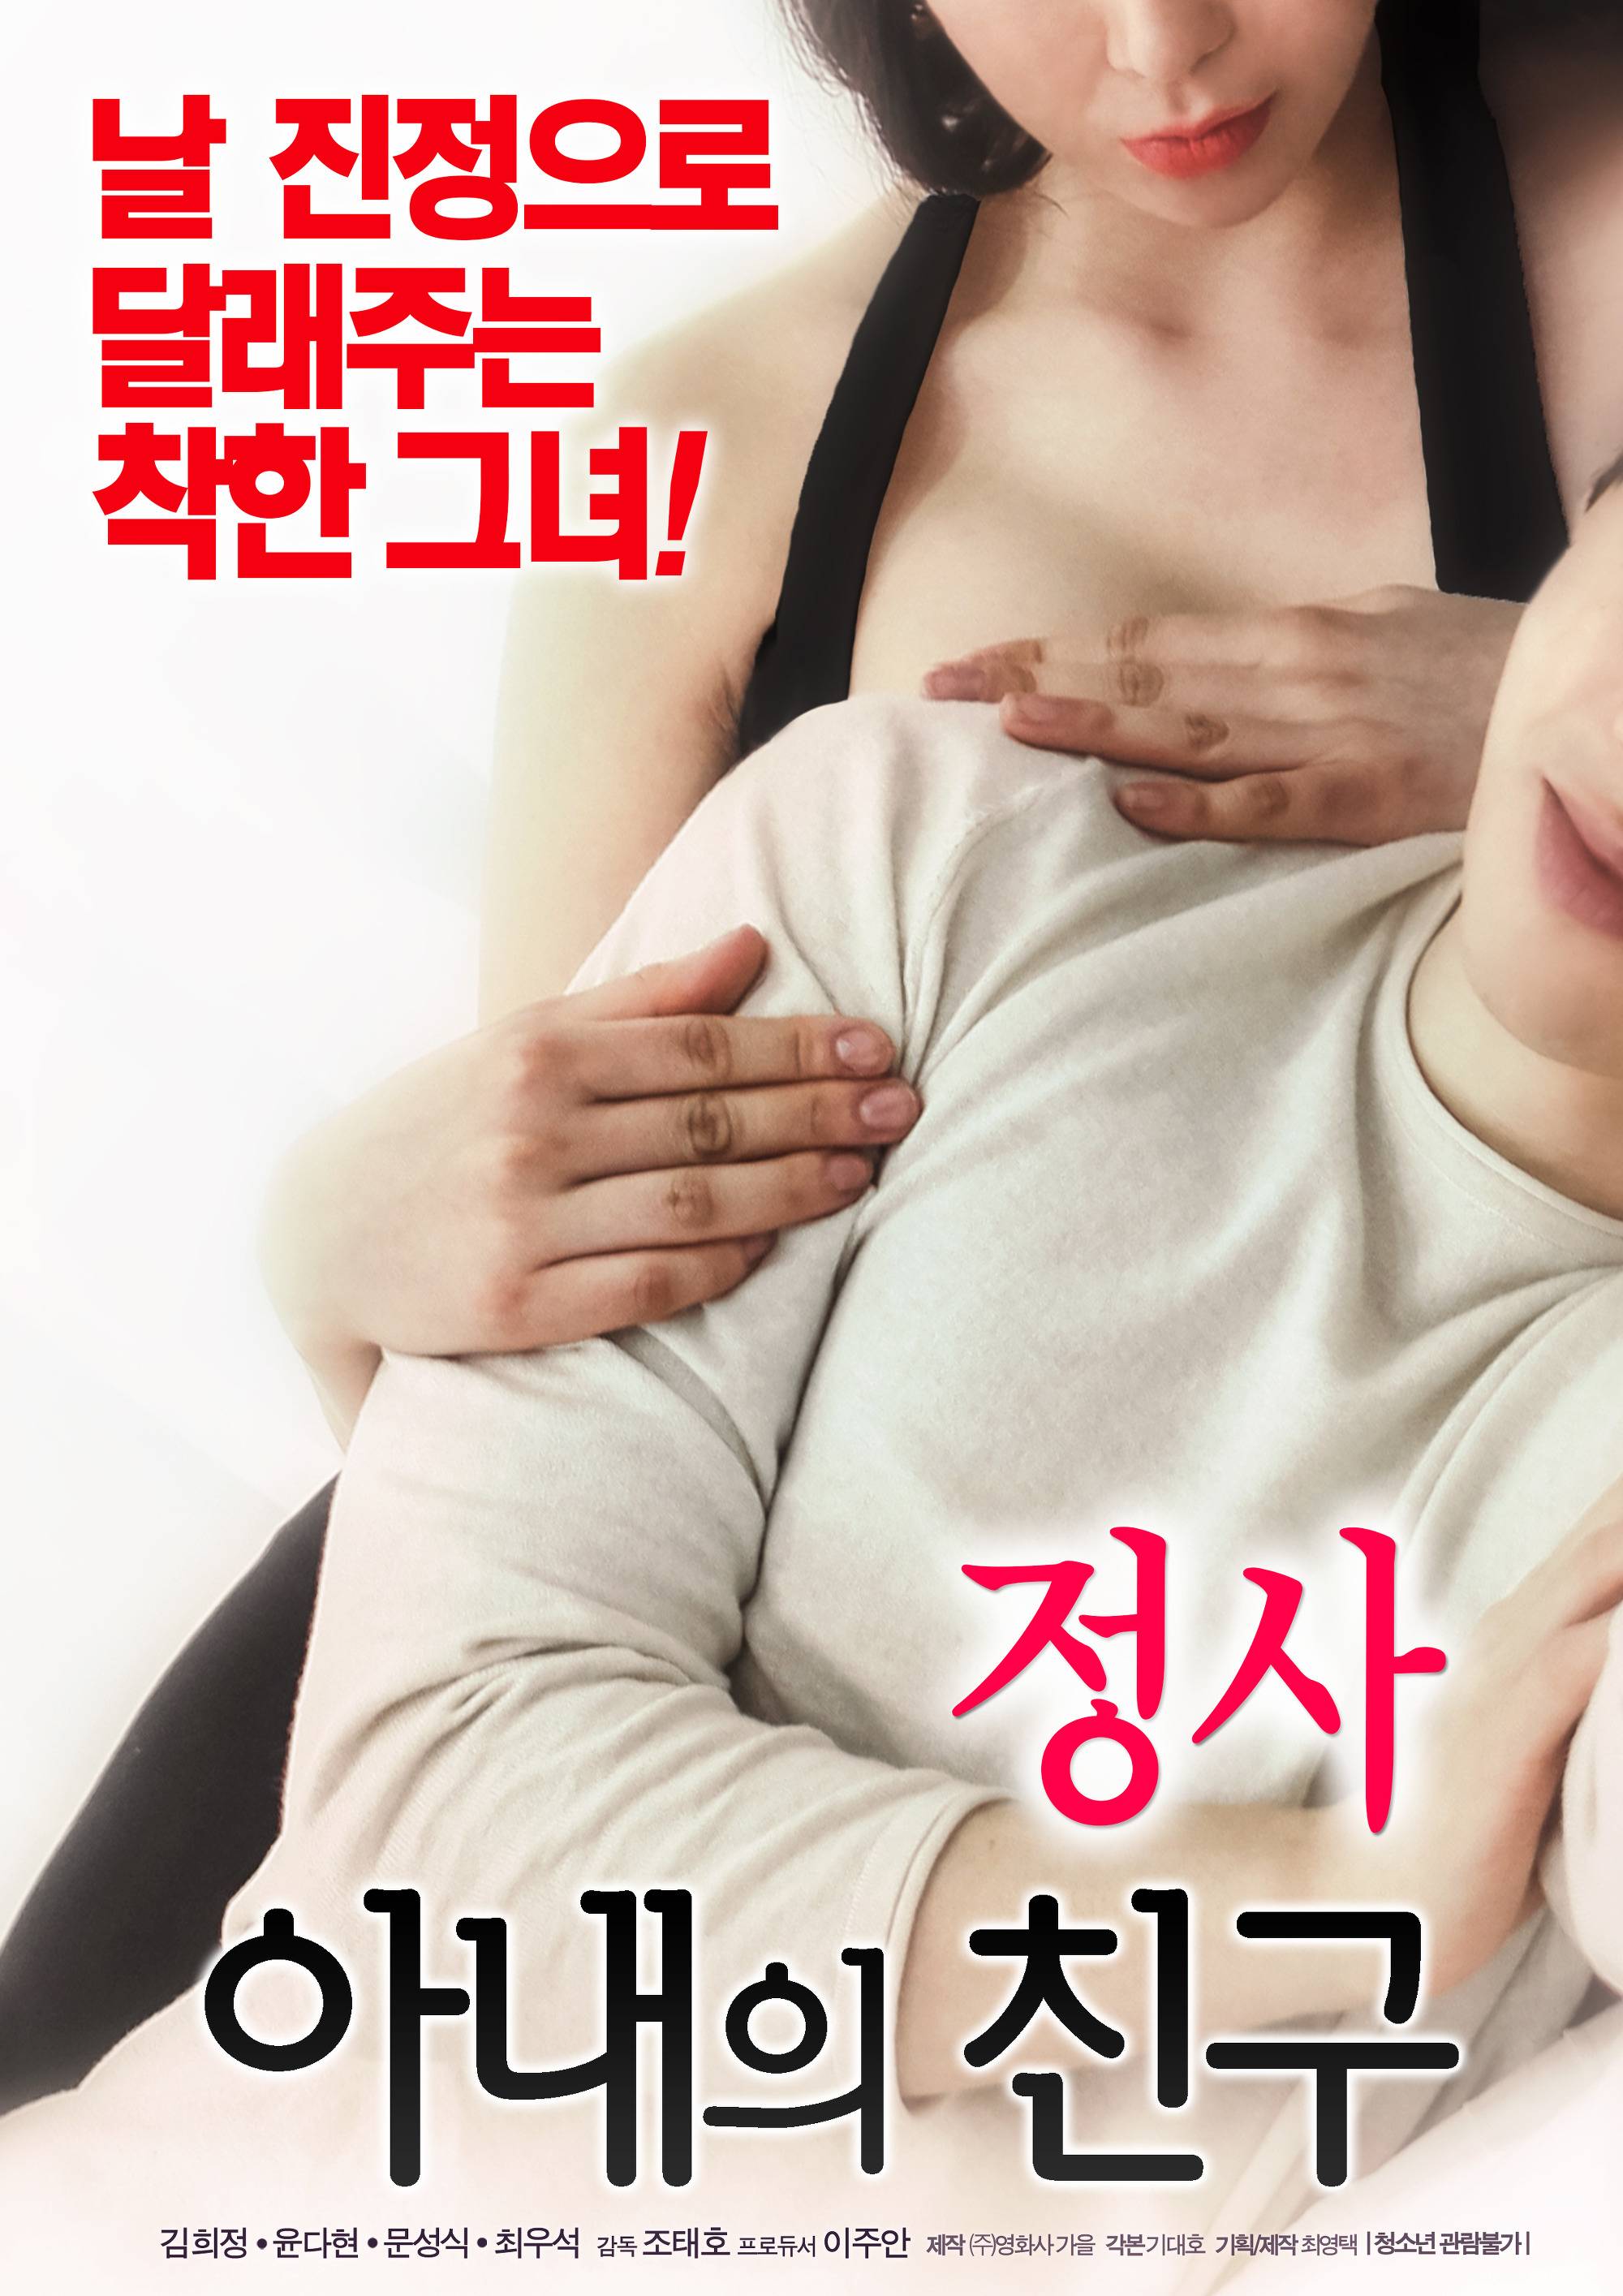 New Movie An Affair My Wifes Friend Tells the Story of Four Lonely People HanCinema photo